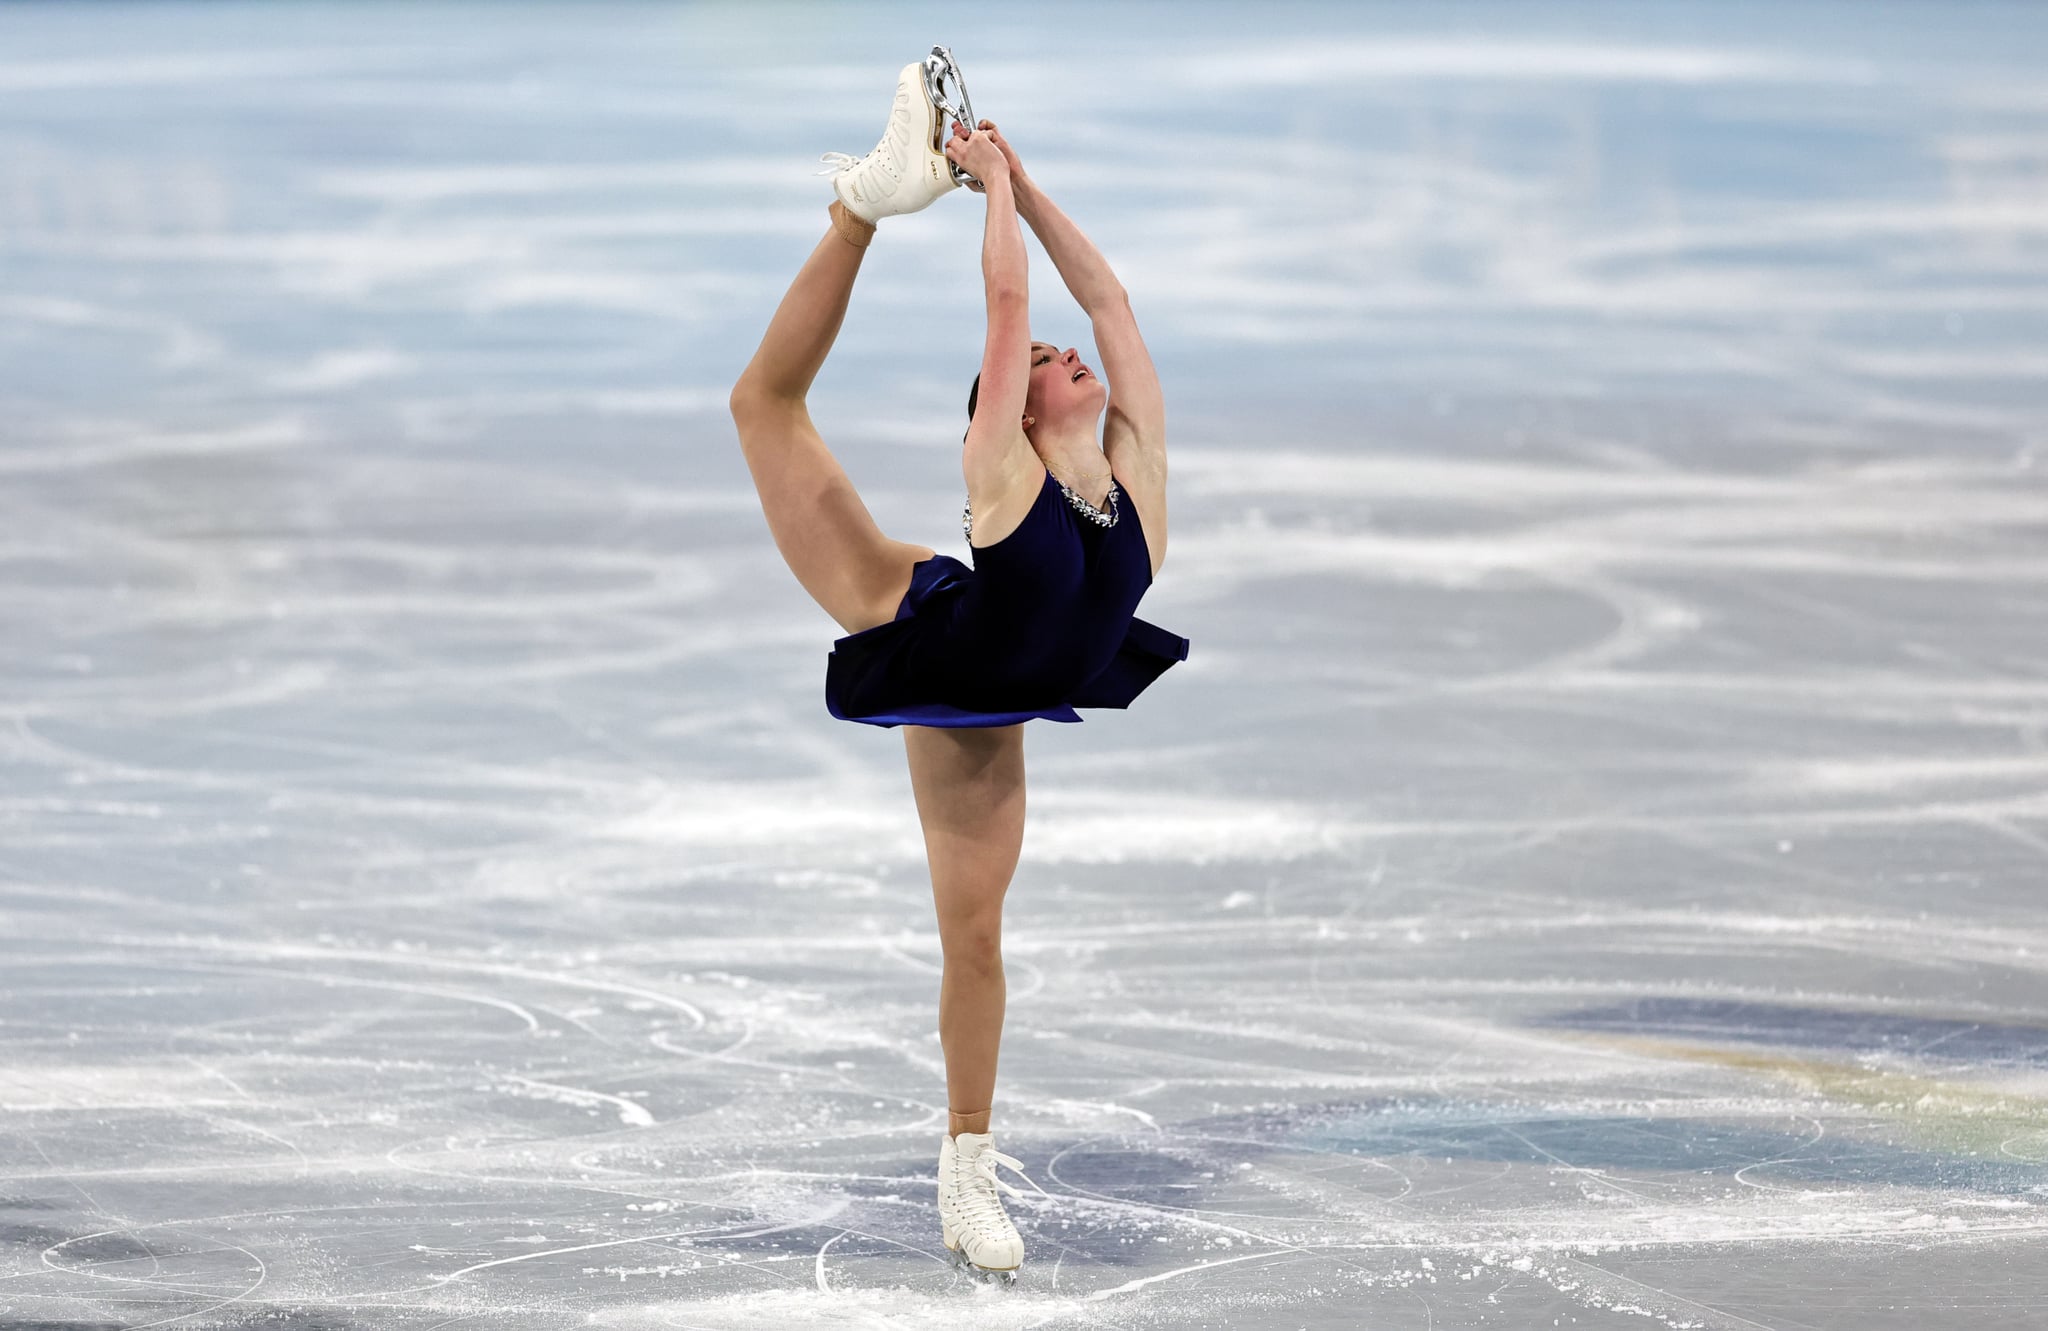 BEIJING, CHINA - FEBRUARY 15: Mariah Bell of Team United States skates during the Women Single Skating Short Program on day eleven of the Beijing 2022 Winter Olympic Games at Capital Indoor Stadium on February 15, 2022 in Beijing, China. (Photo by Amin Mohammad Jamali/Getty Images)